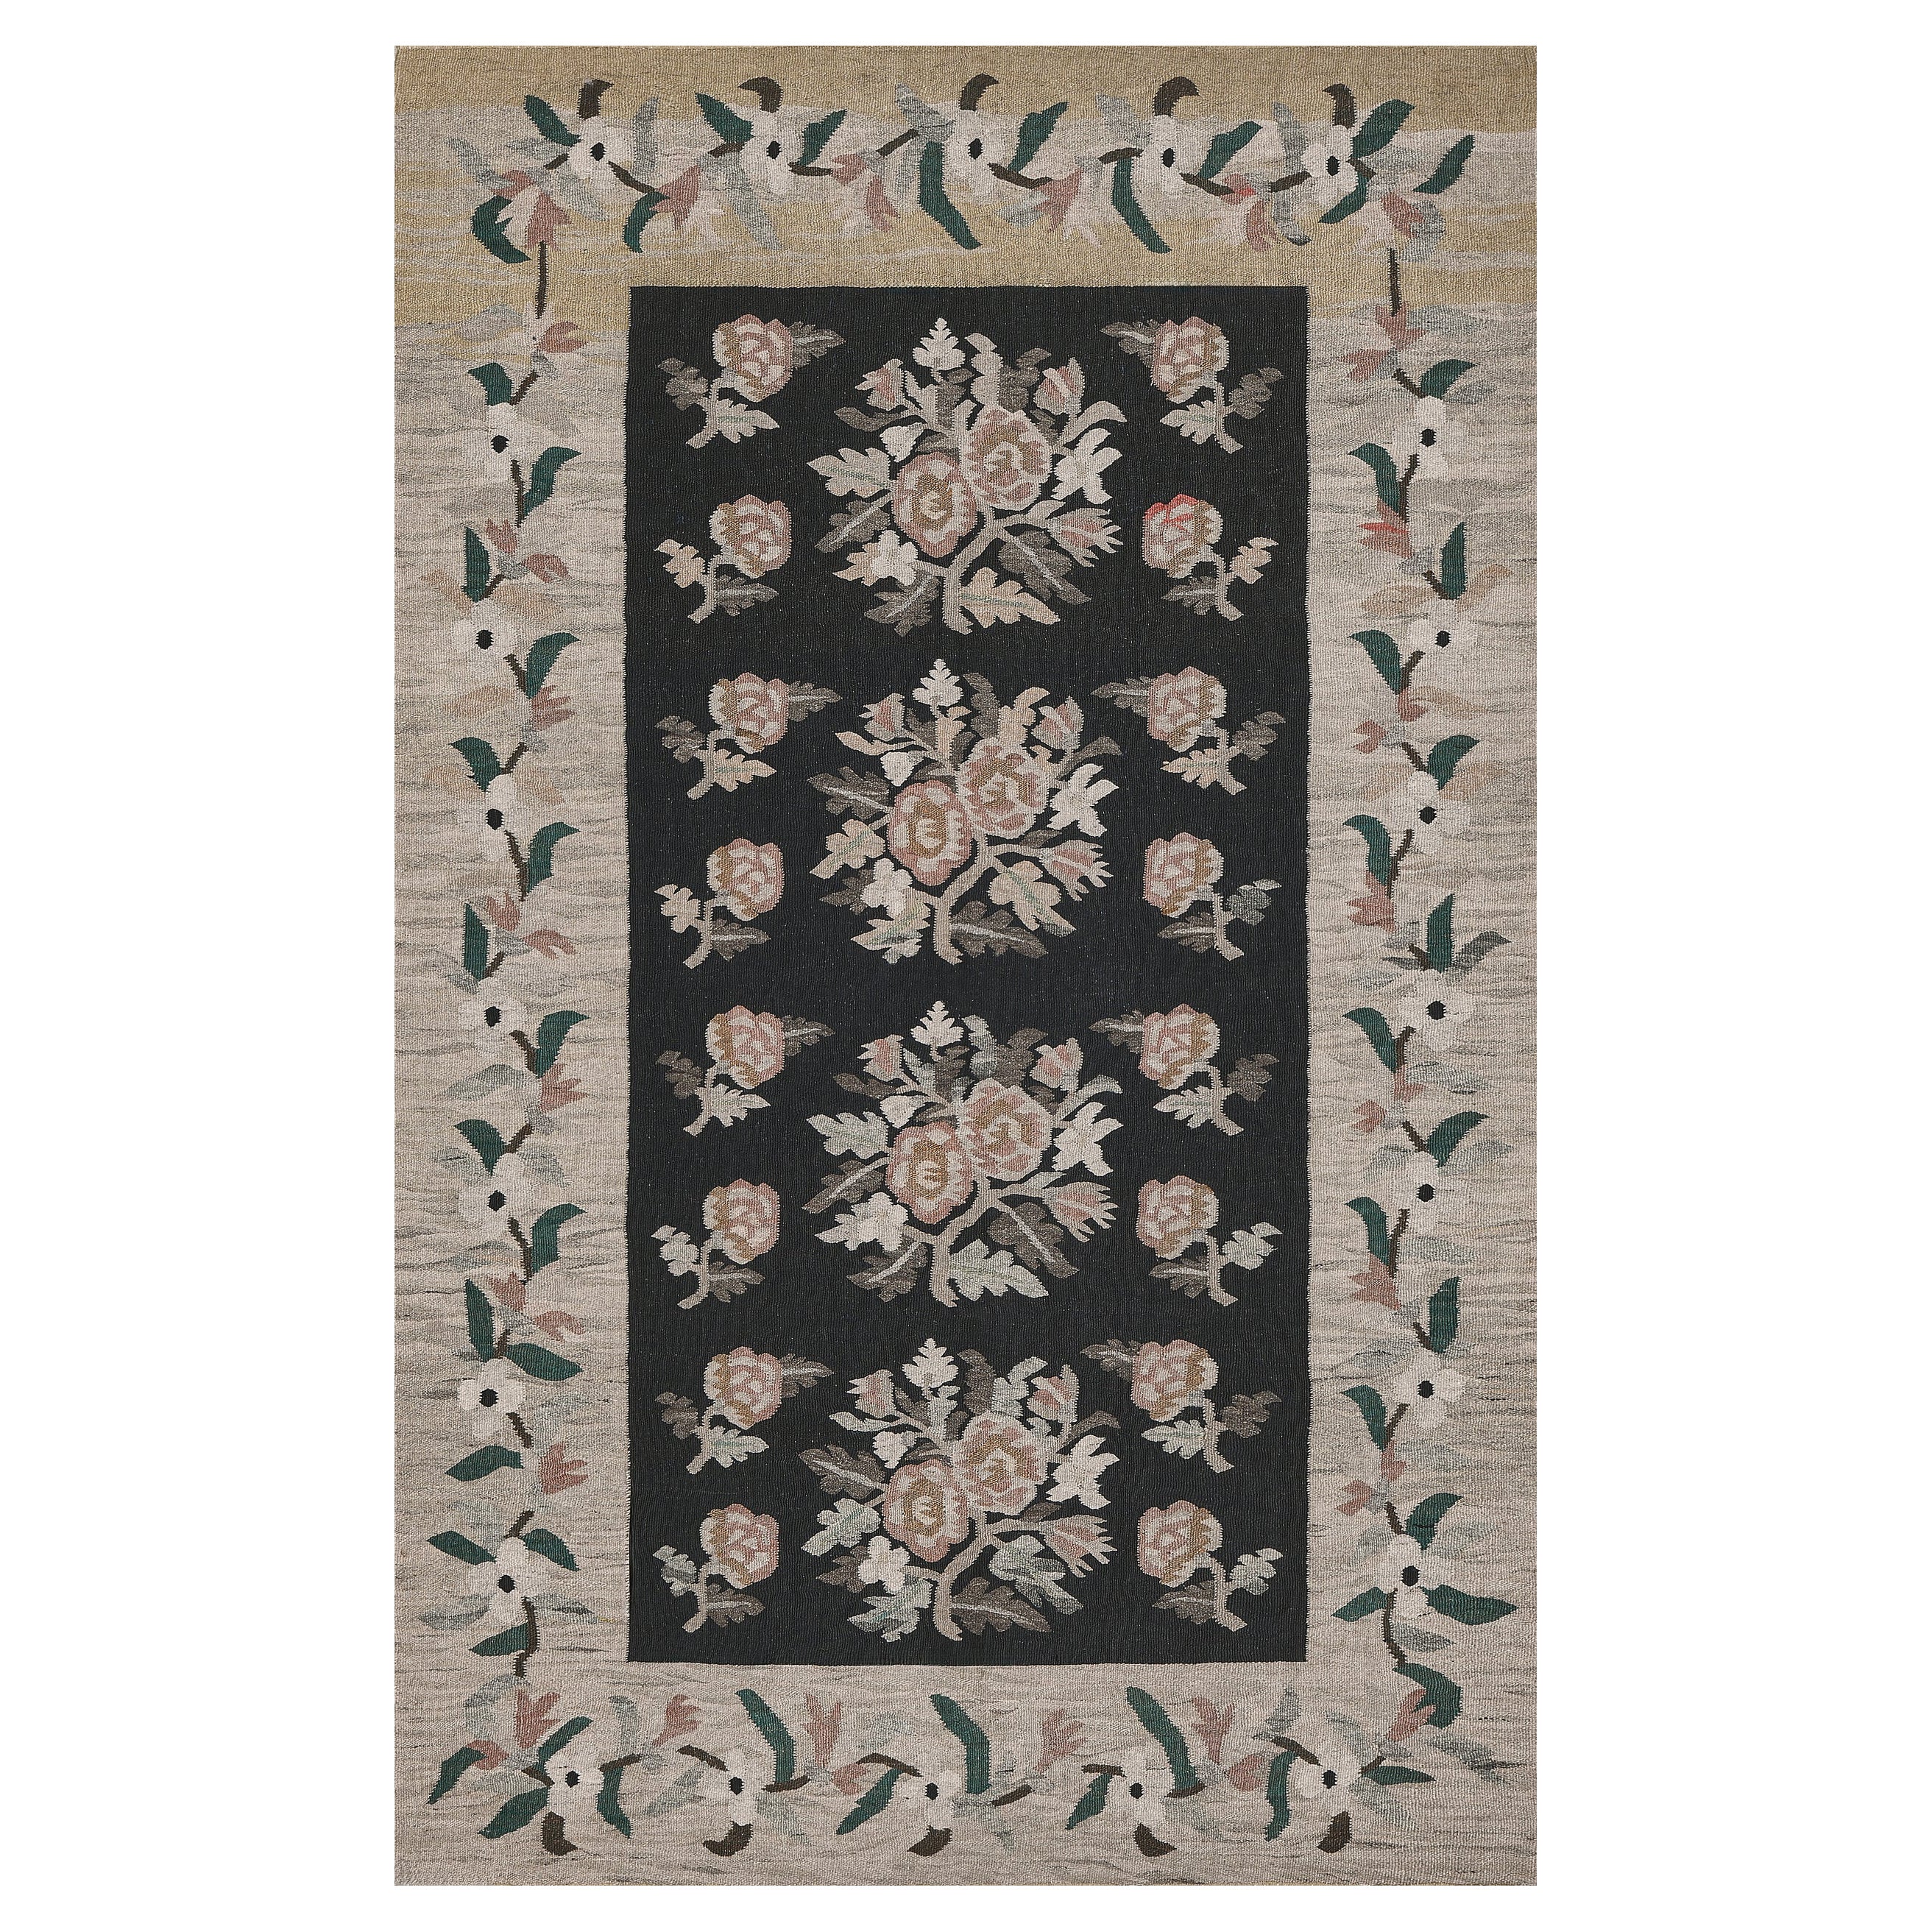 Antique Hand-woven Wool Floral Bessarabian Rug from Romania